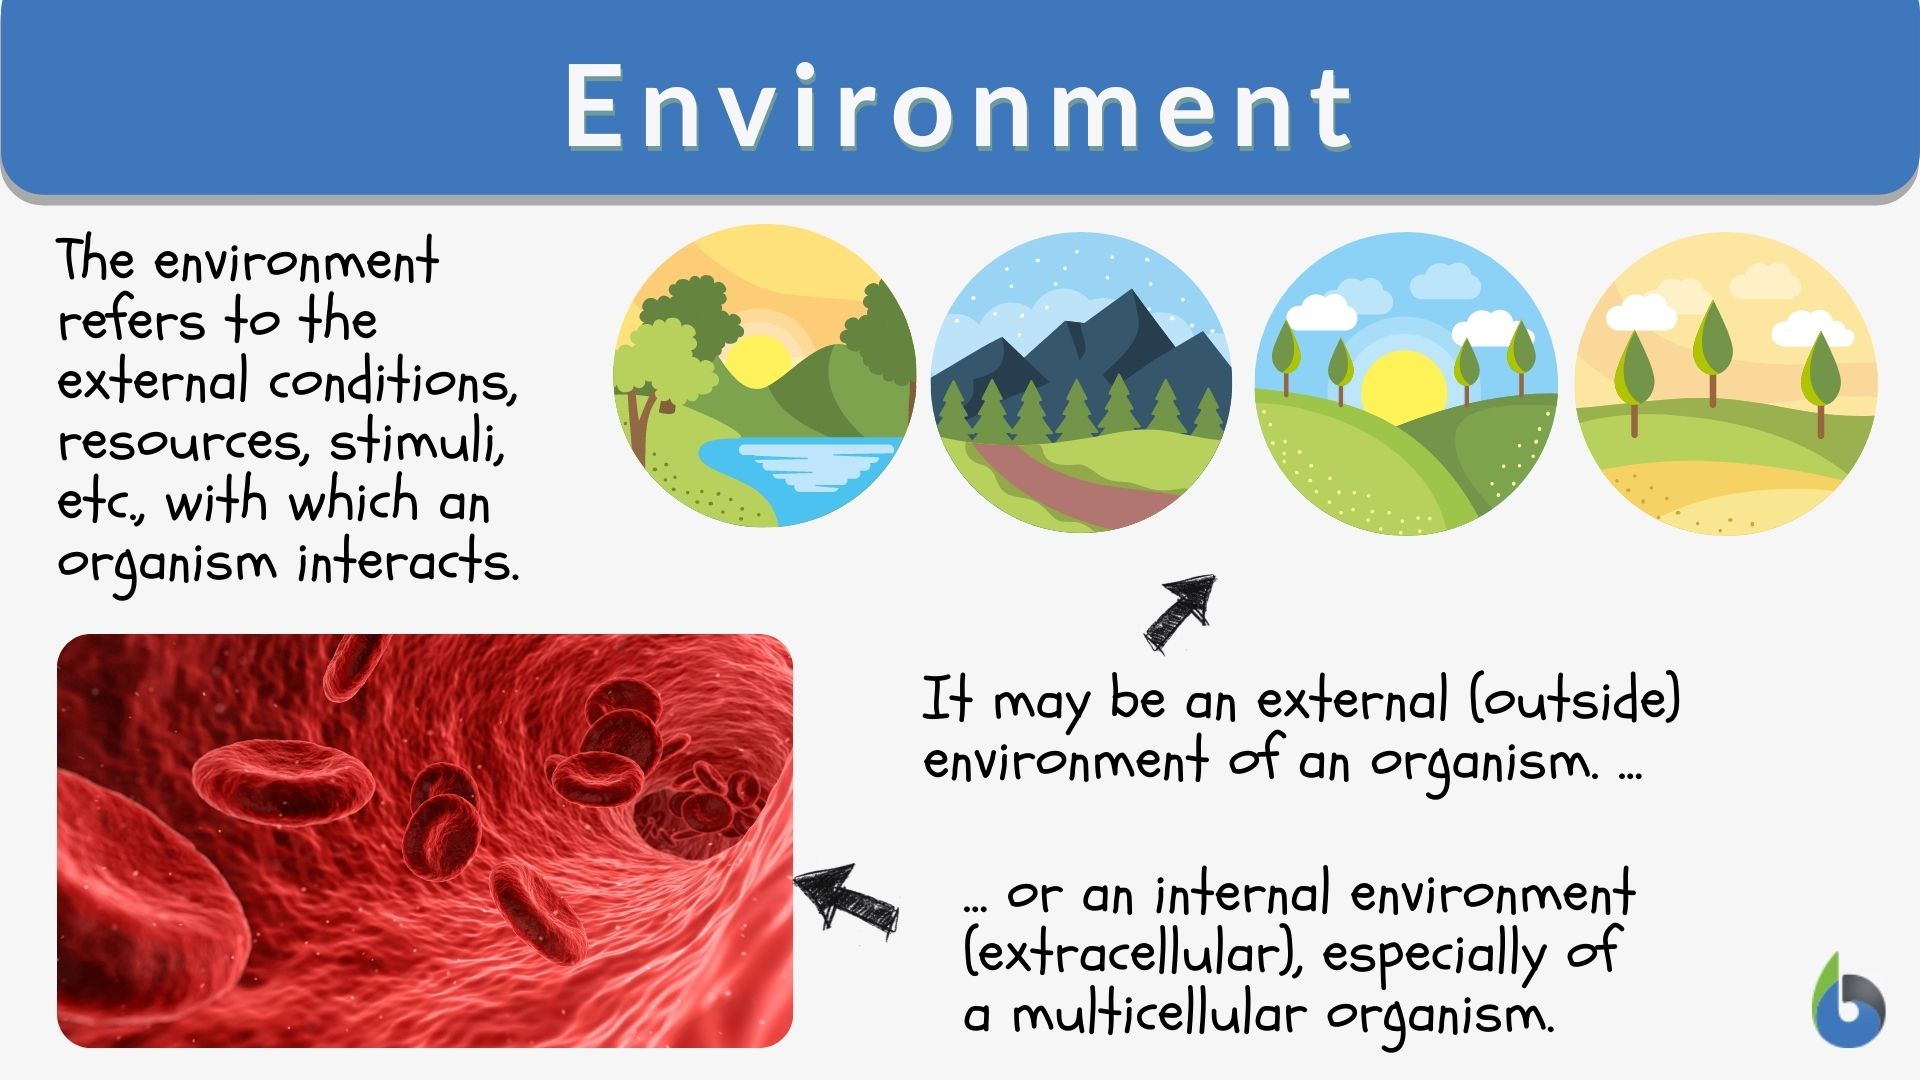 What is environment in simple words?